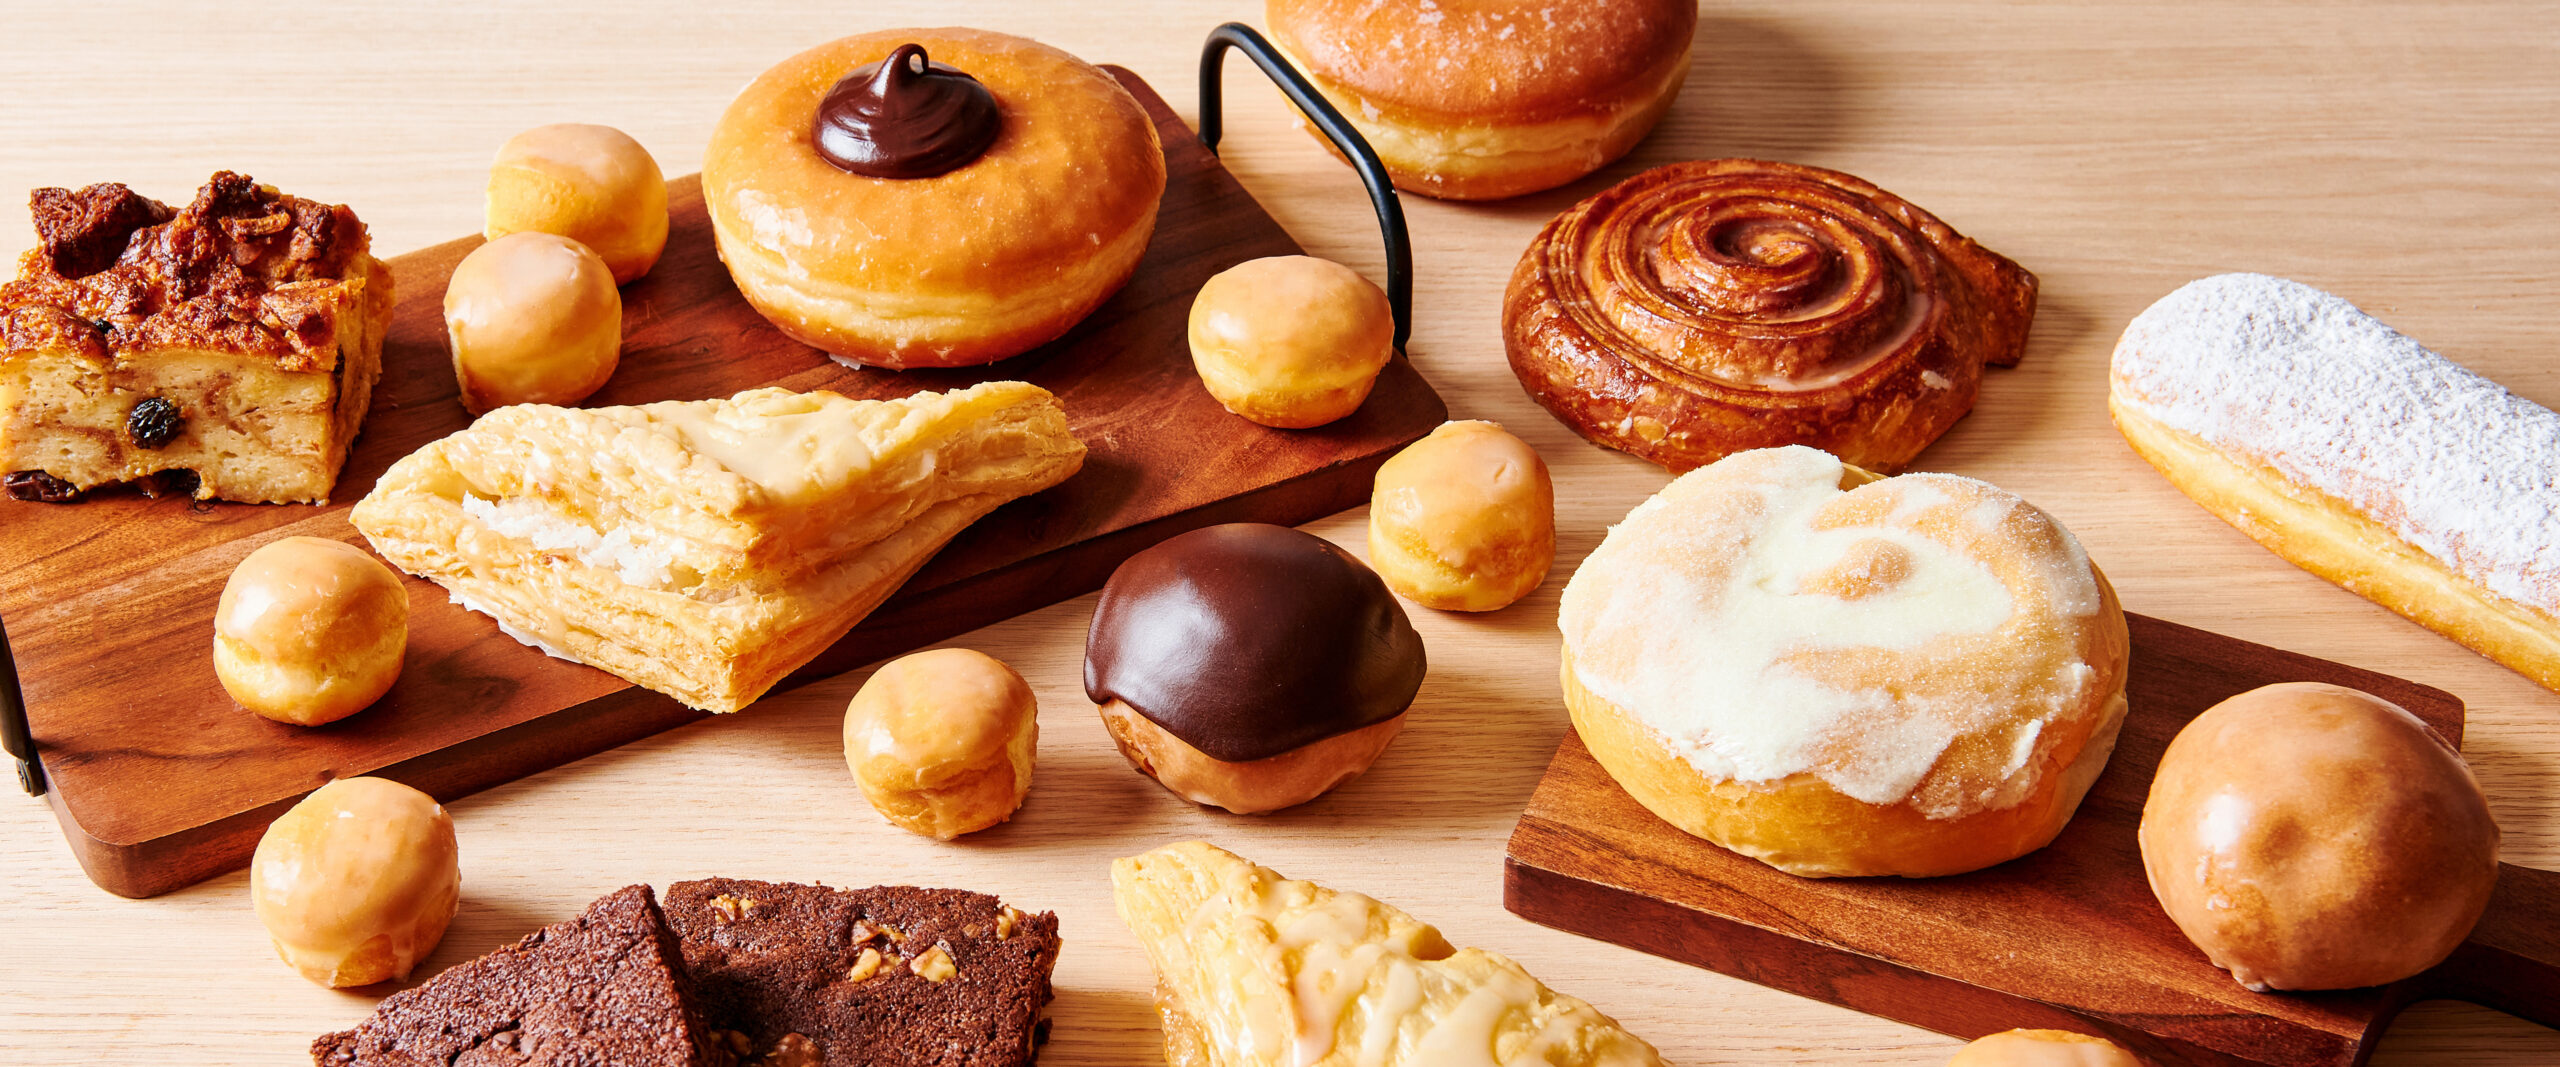 Donuts and assorted pastries